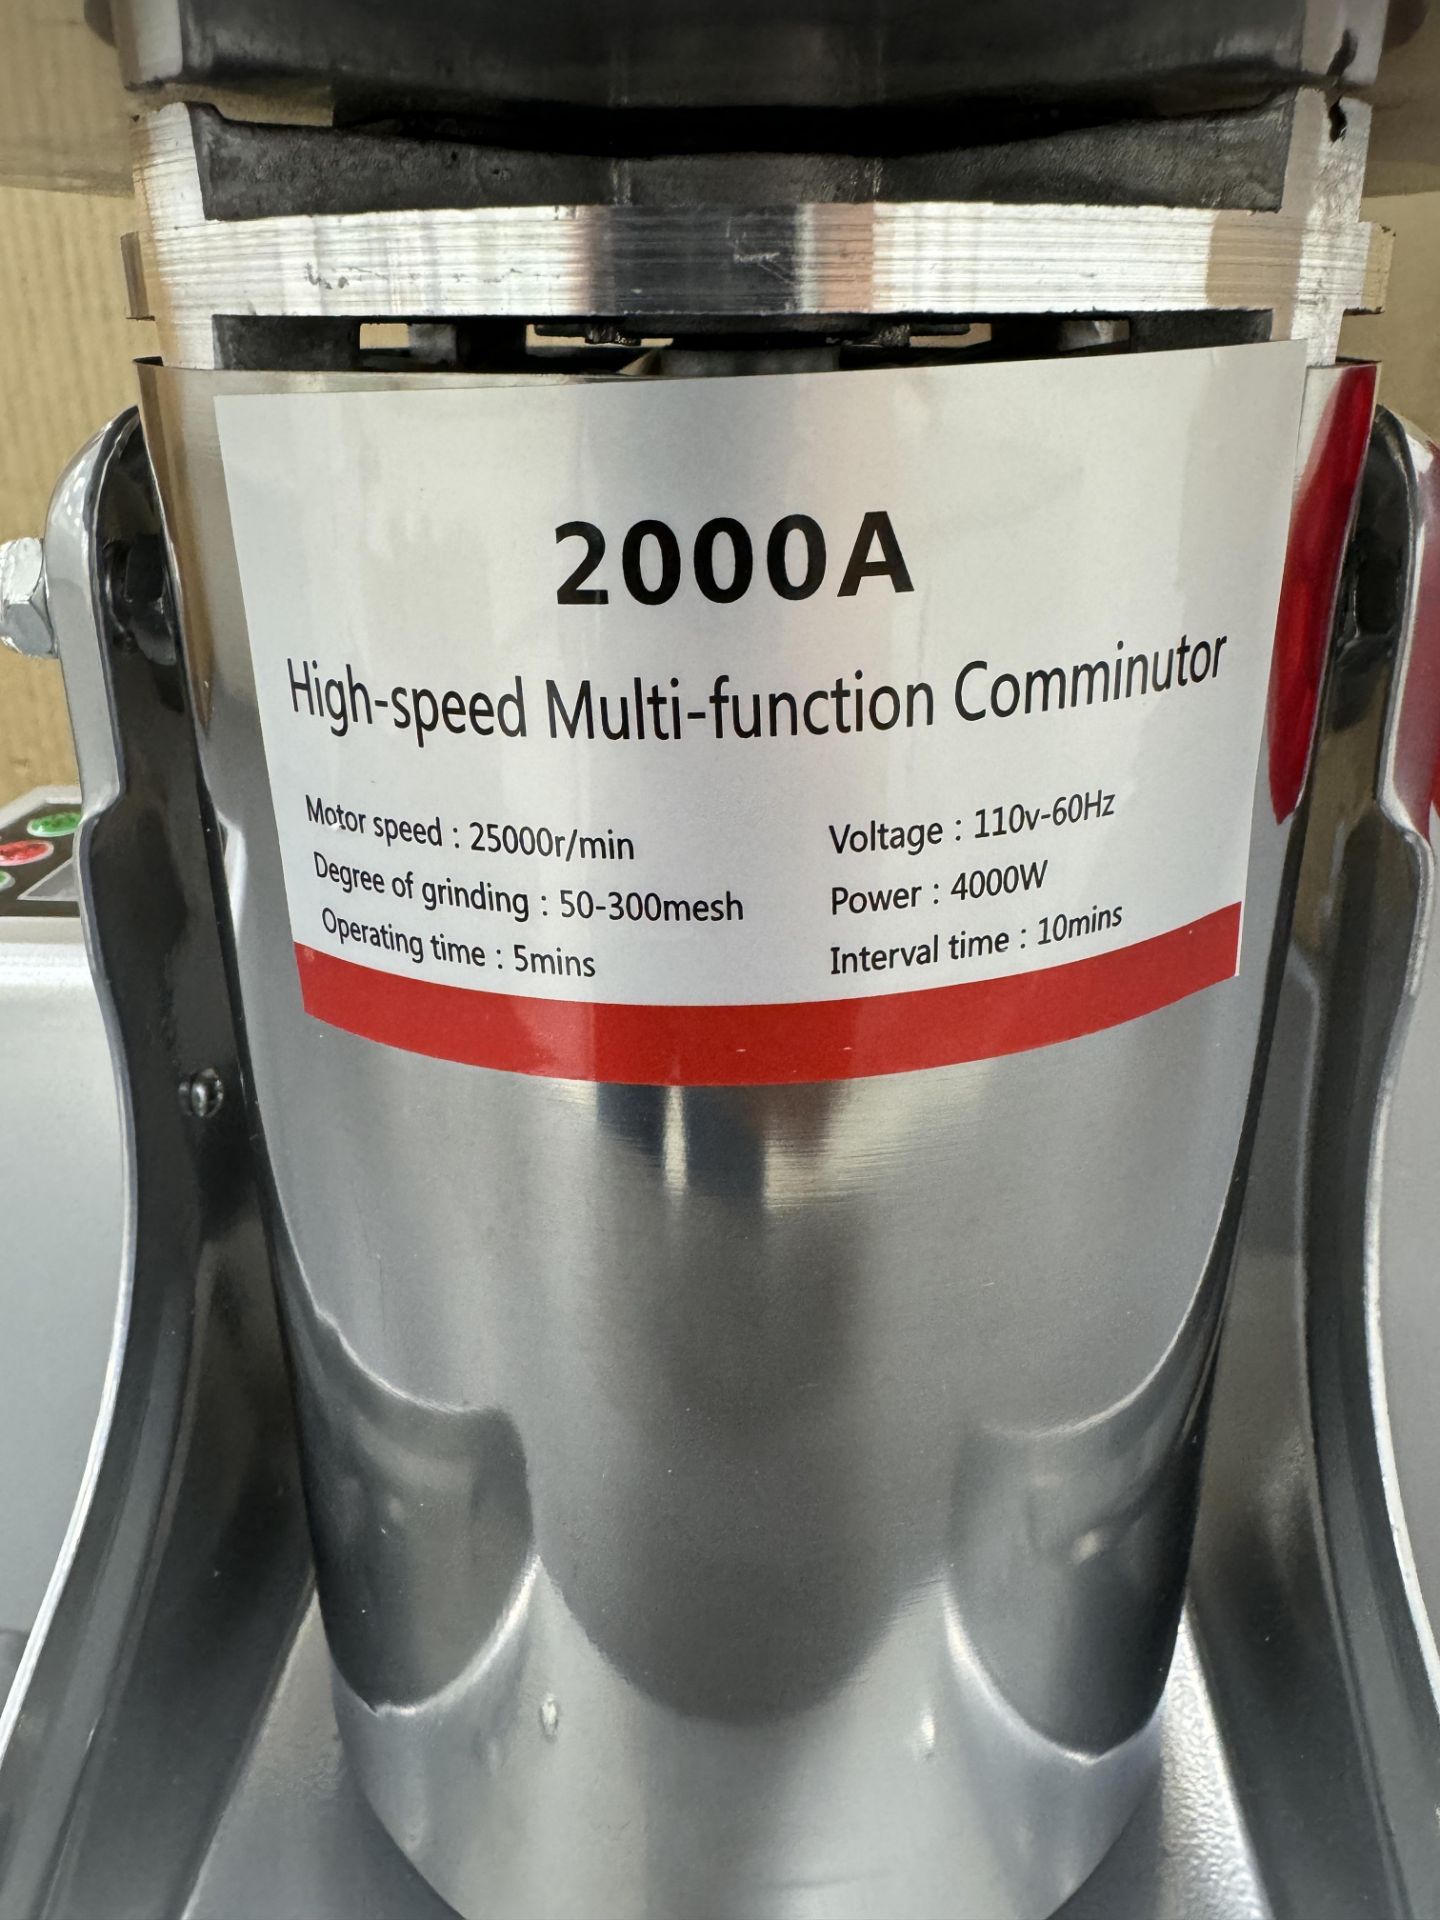 ALD Kitchen Model 2000A, Stainless Steel High Speed Multi Function Electric Grain Grinder/Comminutor - Image 2 of 6